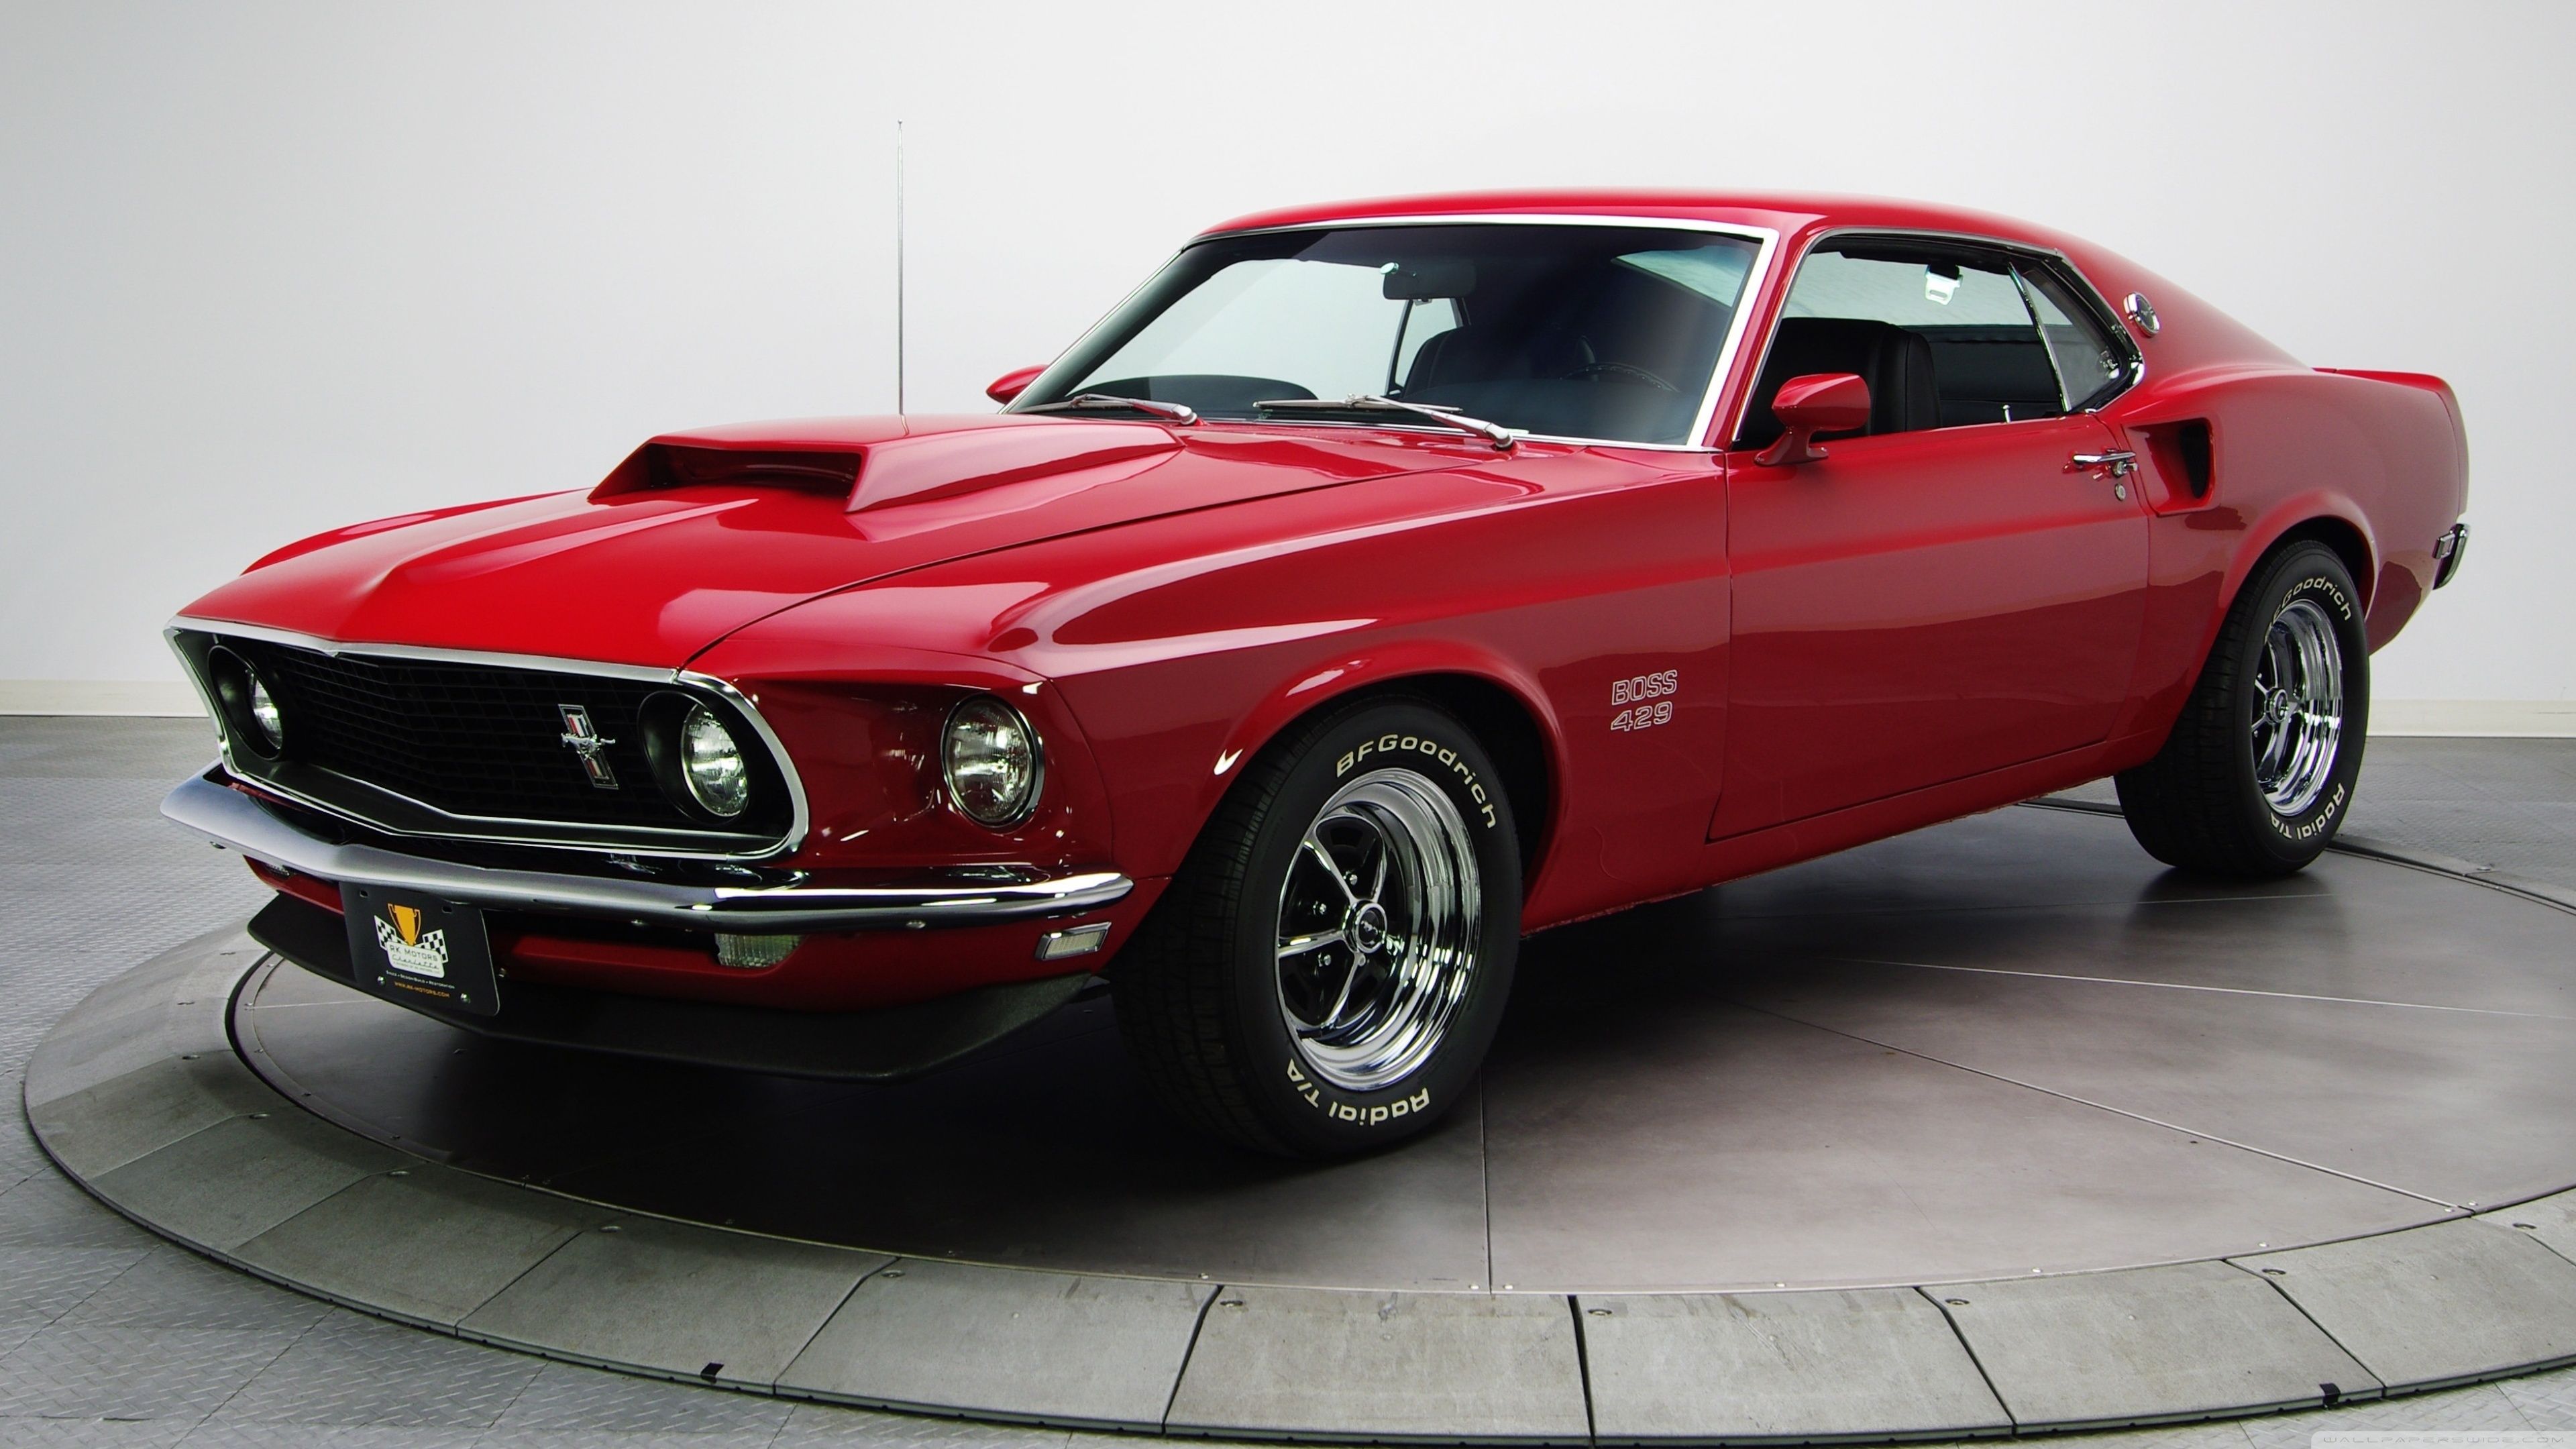 Ford Mustang Boss 429 Wallpaper Free Ford Mustang Boss 429 Background